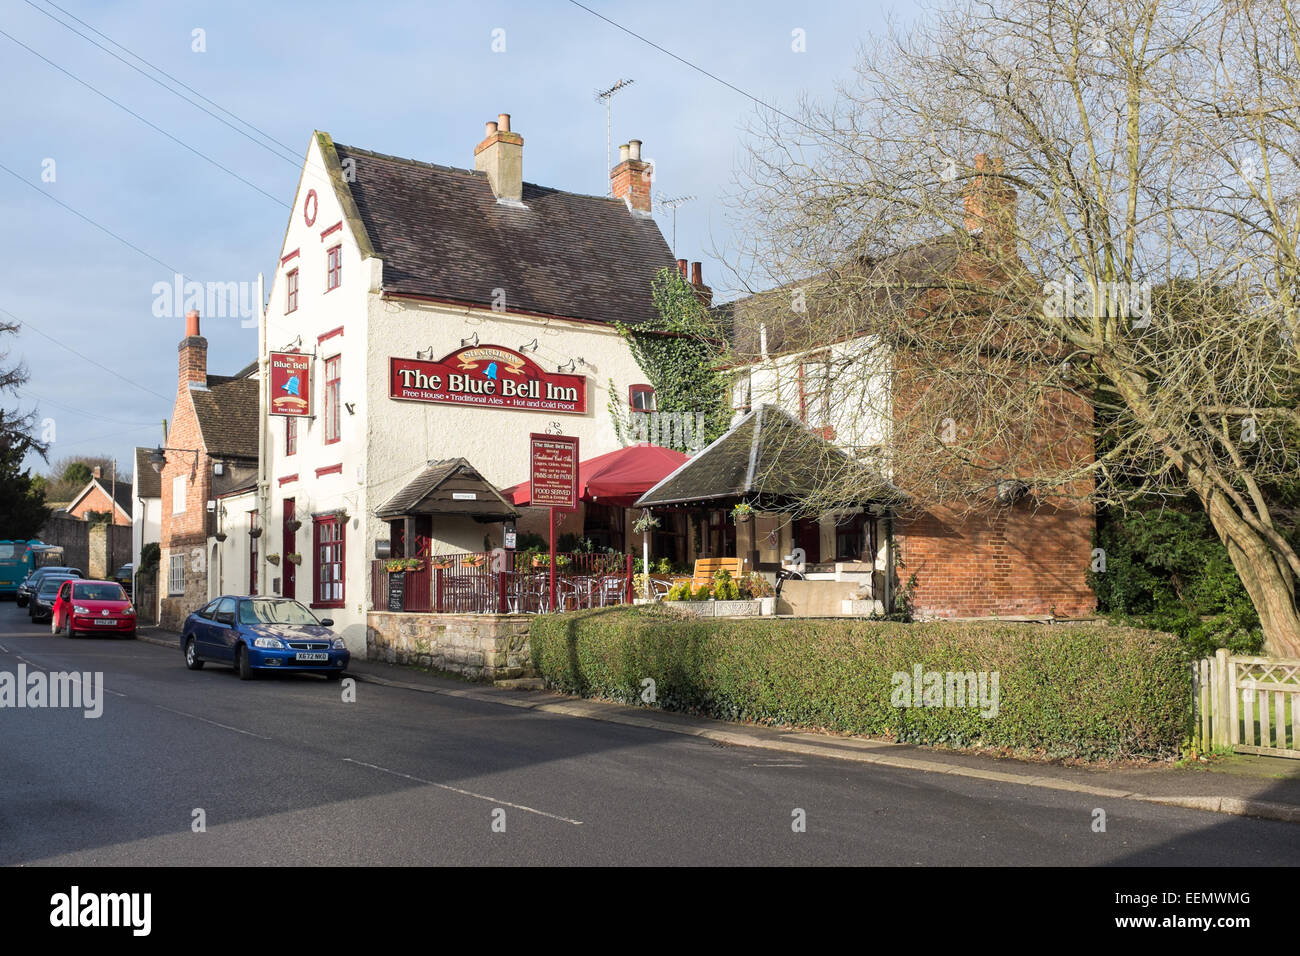 The Blue Bell Inn public house in Melbourne, South Derbyshire Stock Photo